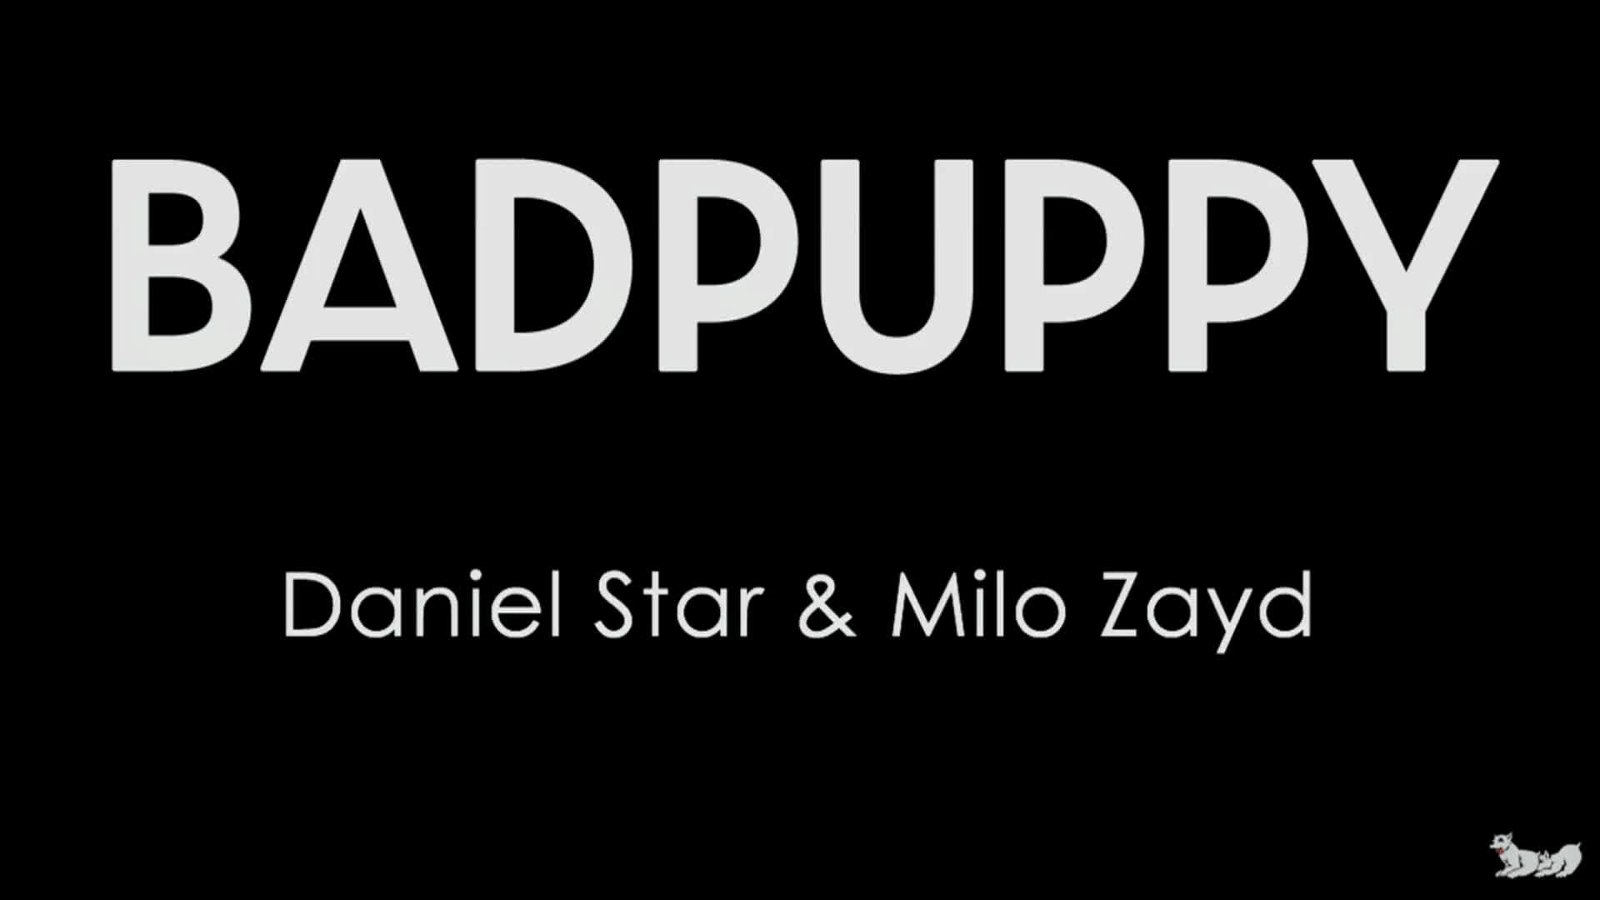 Video by BadpuppyOfficial with the username @BadpuppyOfficial, who is a brand user,  April 20, 2024 at 2:10 PM. The post is about the topic Gay Porn and the text says 'Daniel pushes his finger into Milo's tight hole as he strokes his cock faster
https://www.badpuppy.com/tour/trailers/Daniel-and-Milo.html
#fitlads #gayfit #gay #gaytwinks #muscles #twink #hunk #jock #uncut #helpinghand'